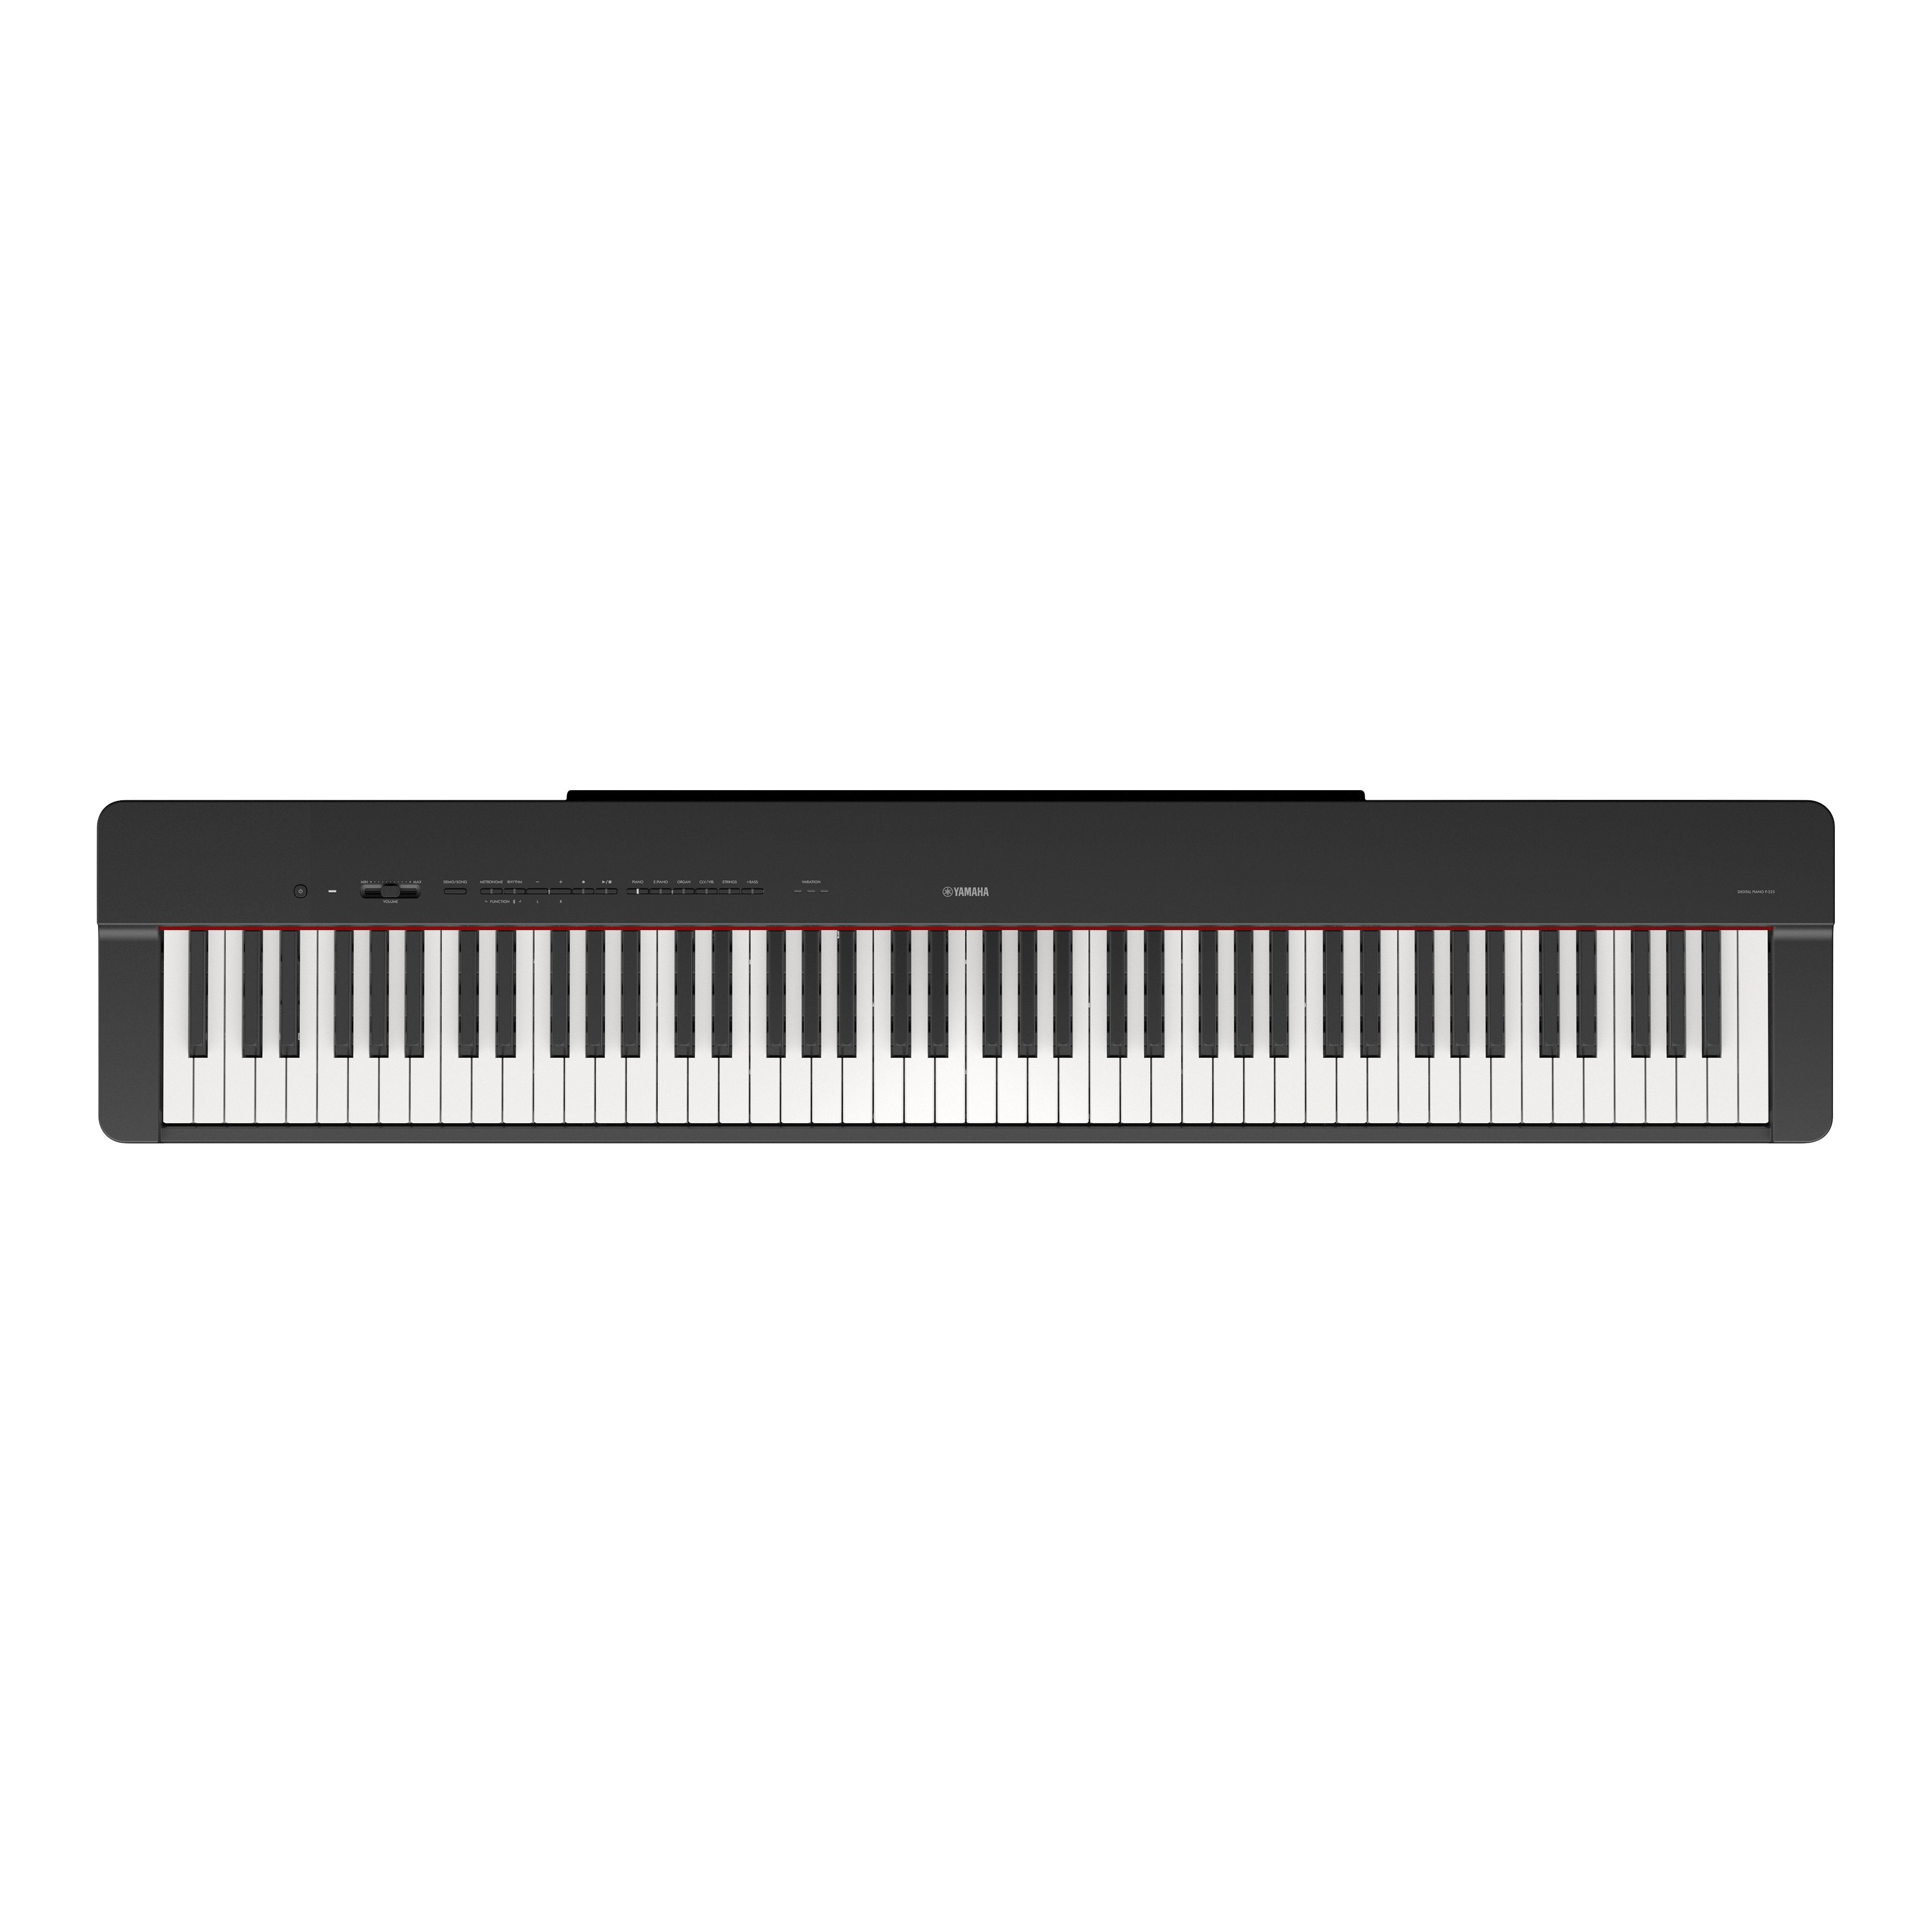 P Series - Pianos - Musical Instruments - Products - Yamaha 